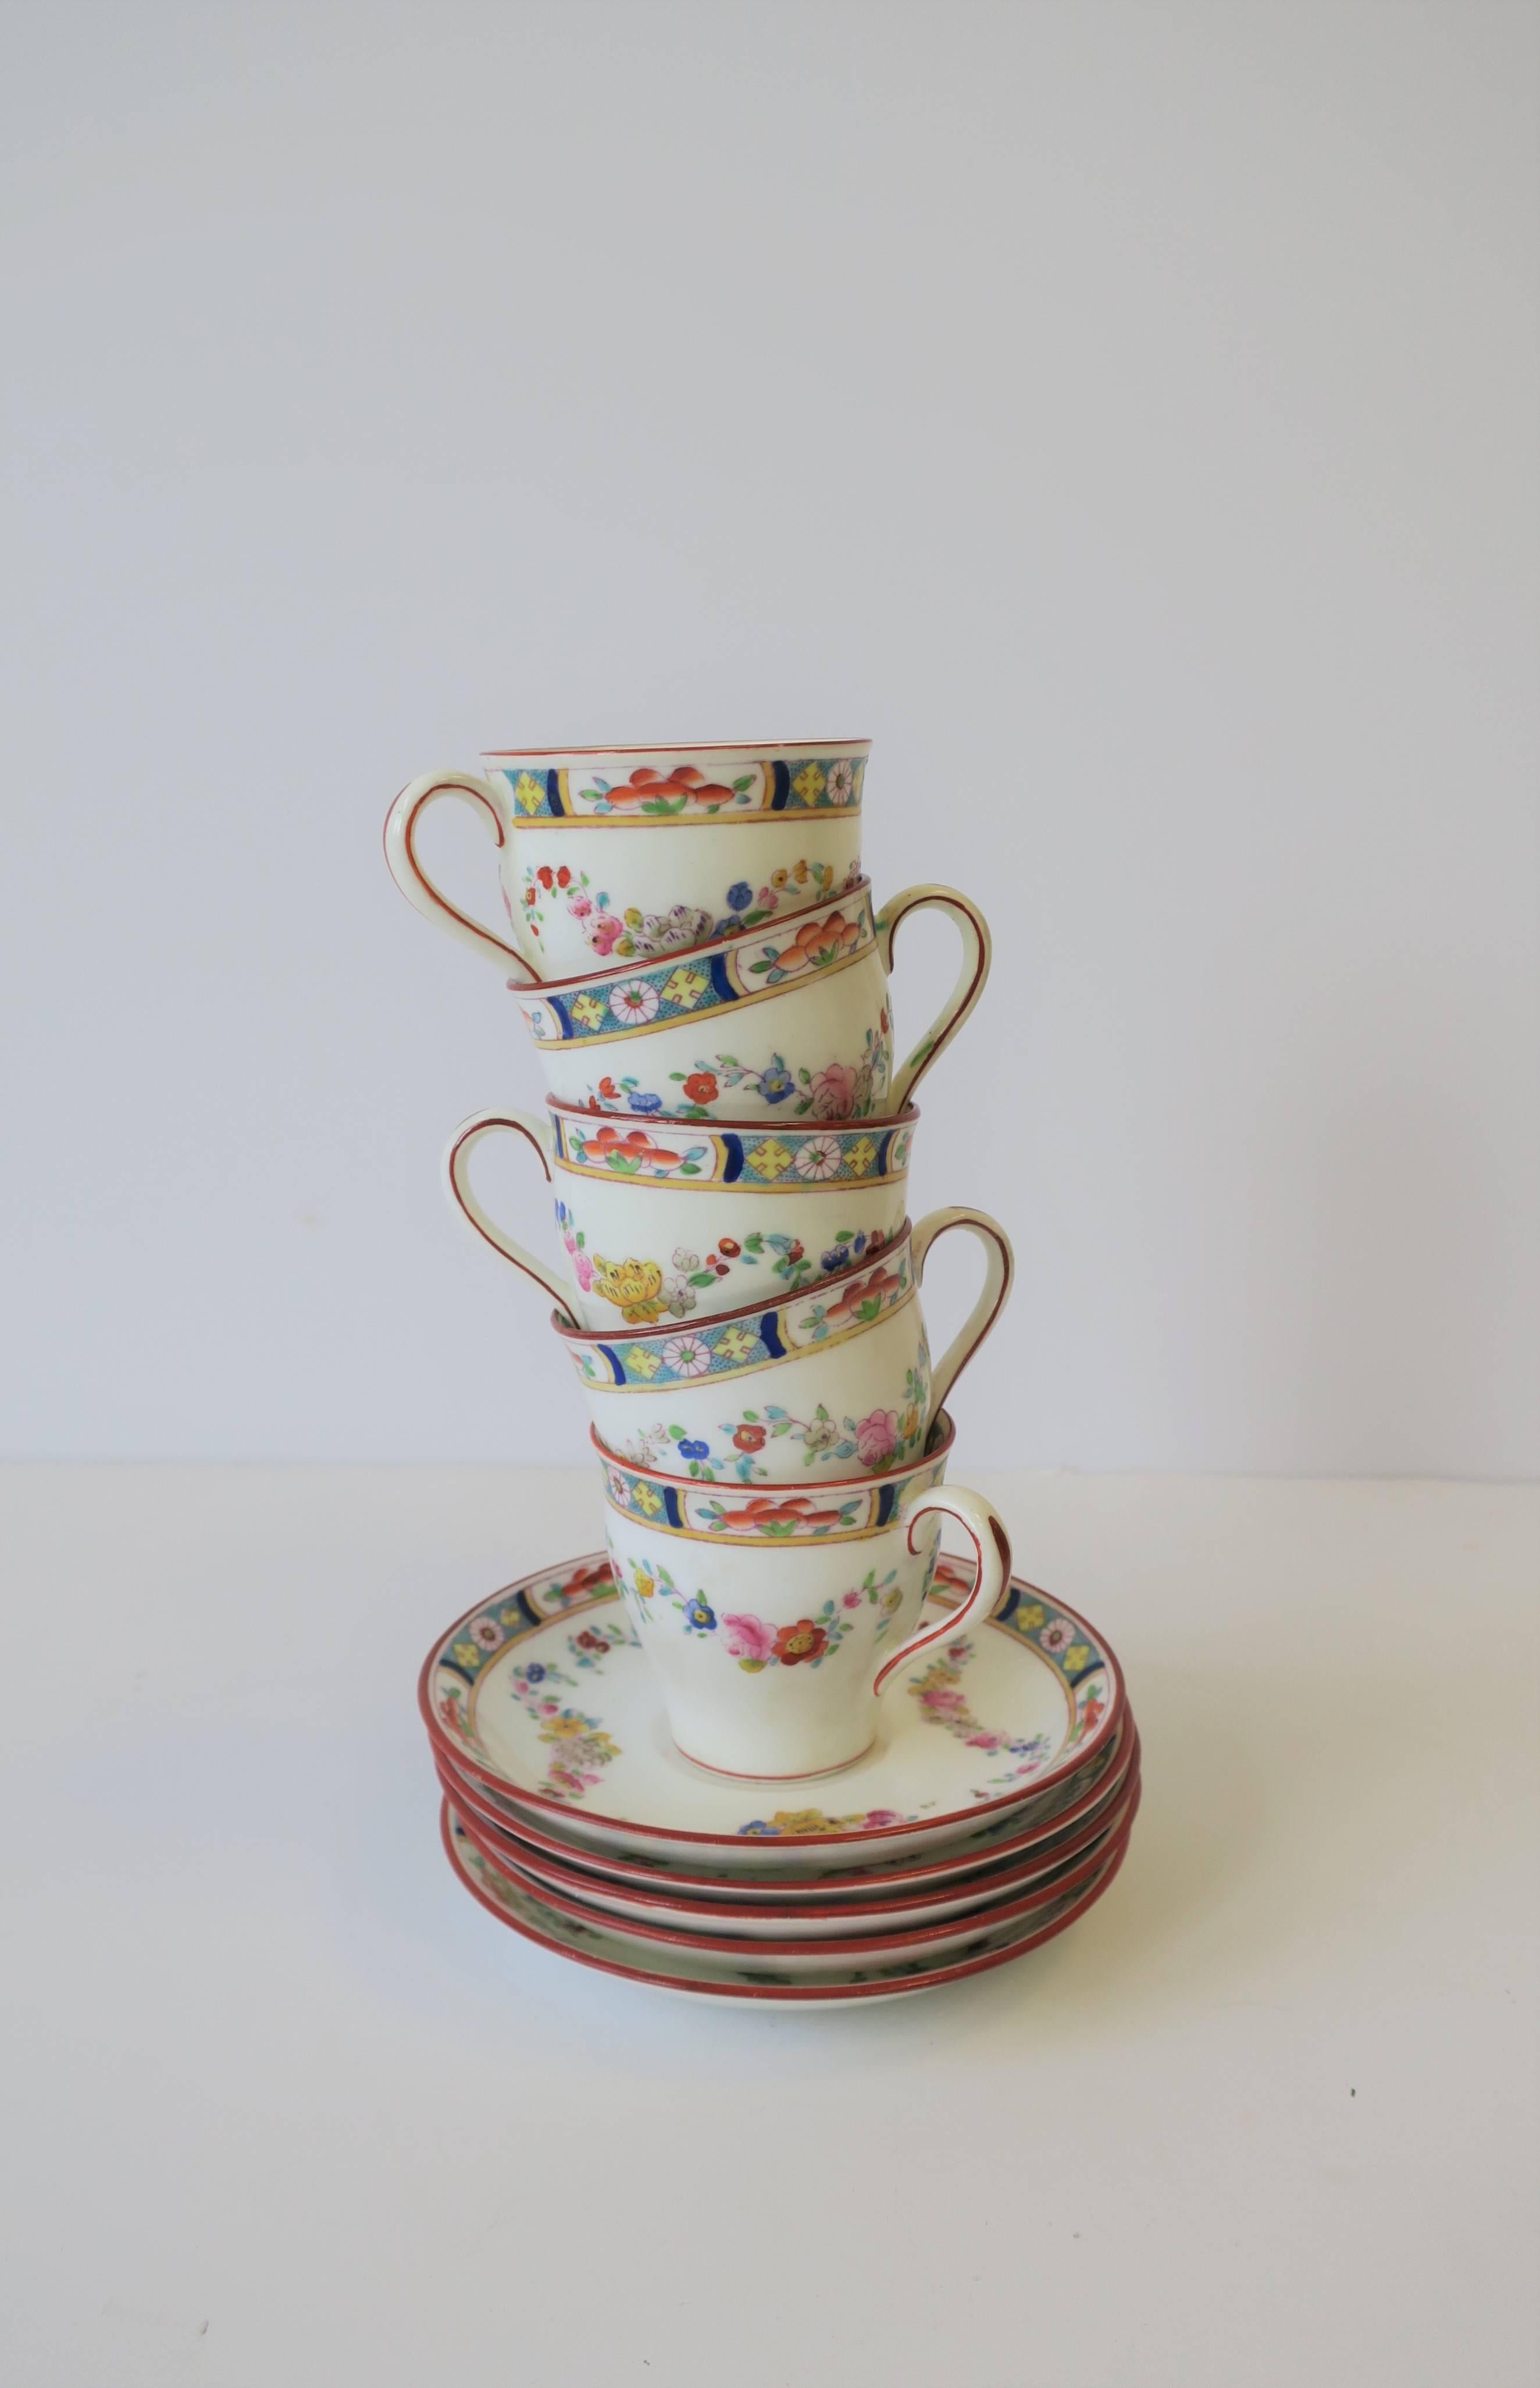 A beautiful set of five English Mintons 'Minton Rose' porcelain espresso coffee or tea demitasse cup and saucer set, circa mid-20th century, England. Beautiful design detail on cups and saucers. Maker's mark's on bottom of all as show in images. Set